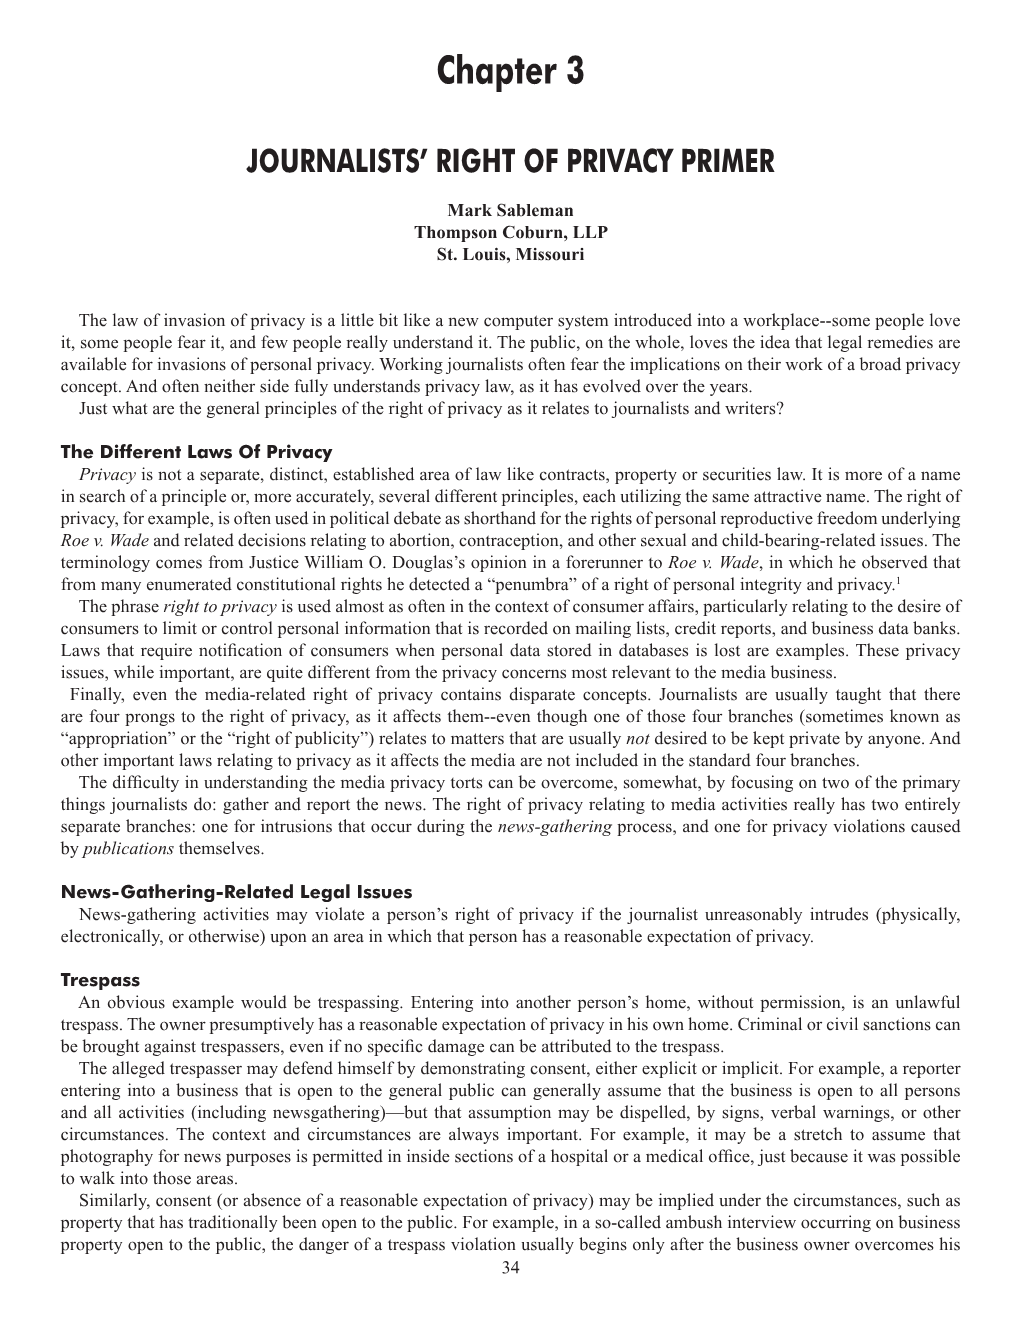 Journalist's Right to Privacy Primer